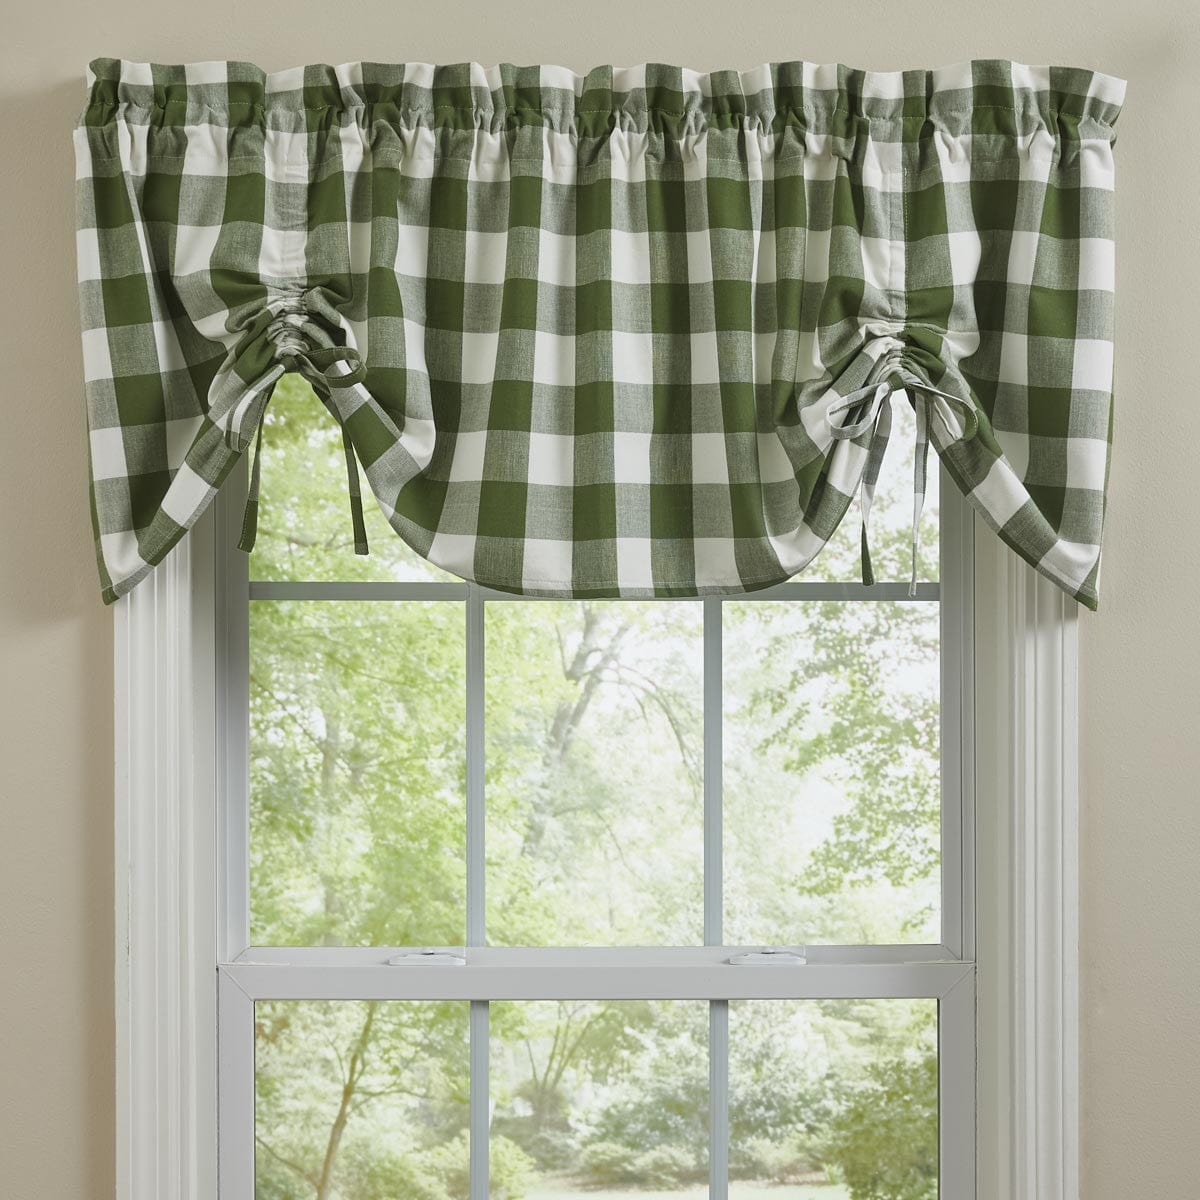 Wicklow Check in Sage Green Farmhouse Valance Lined-Park Designs-The Village Merchant